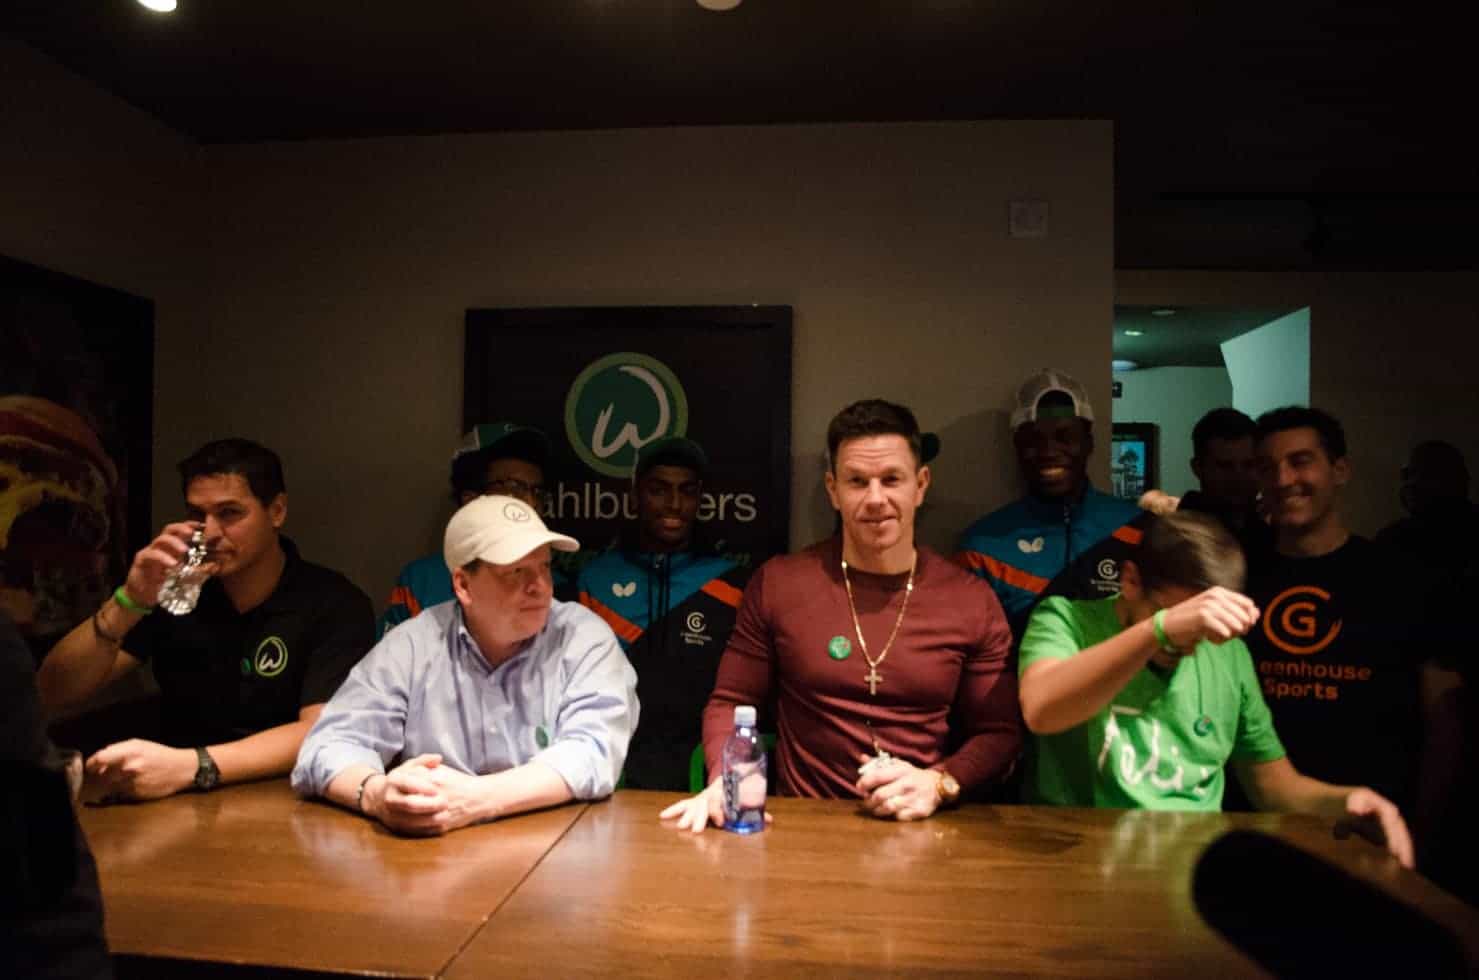 Wahlburgers launch London partnership with homeless charity